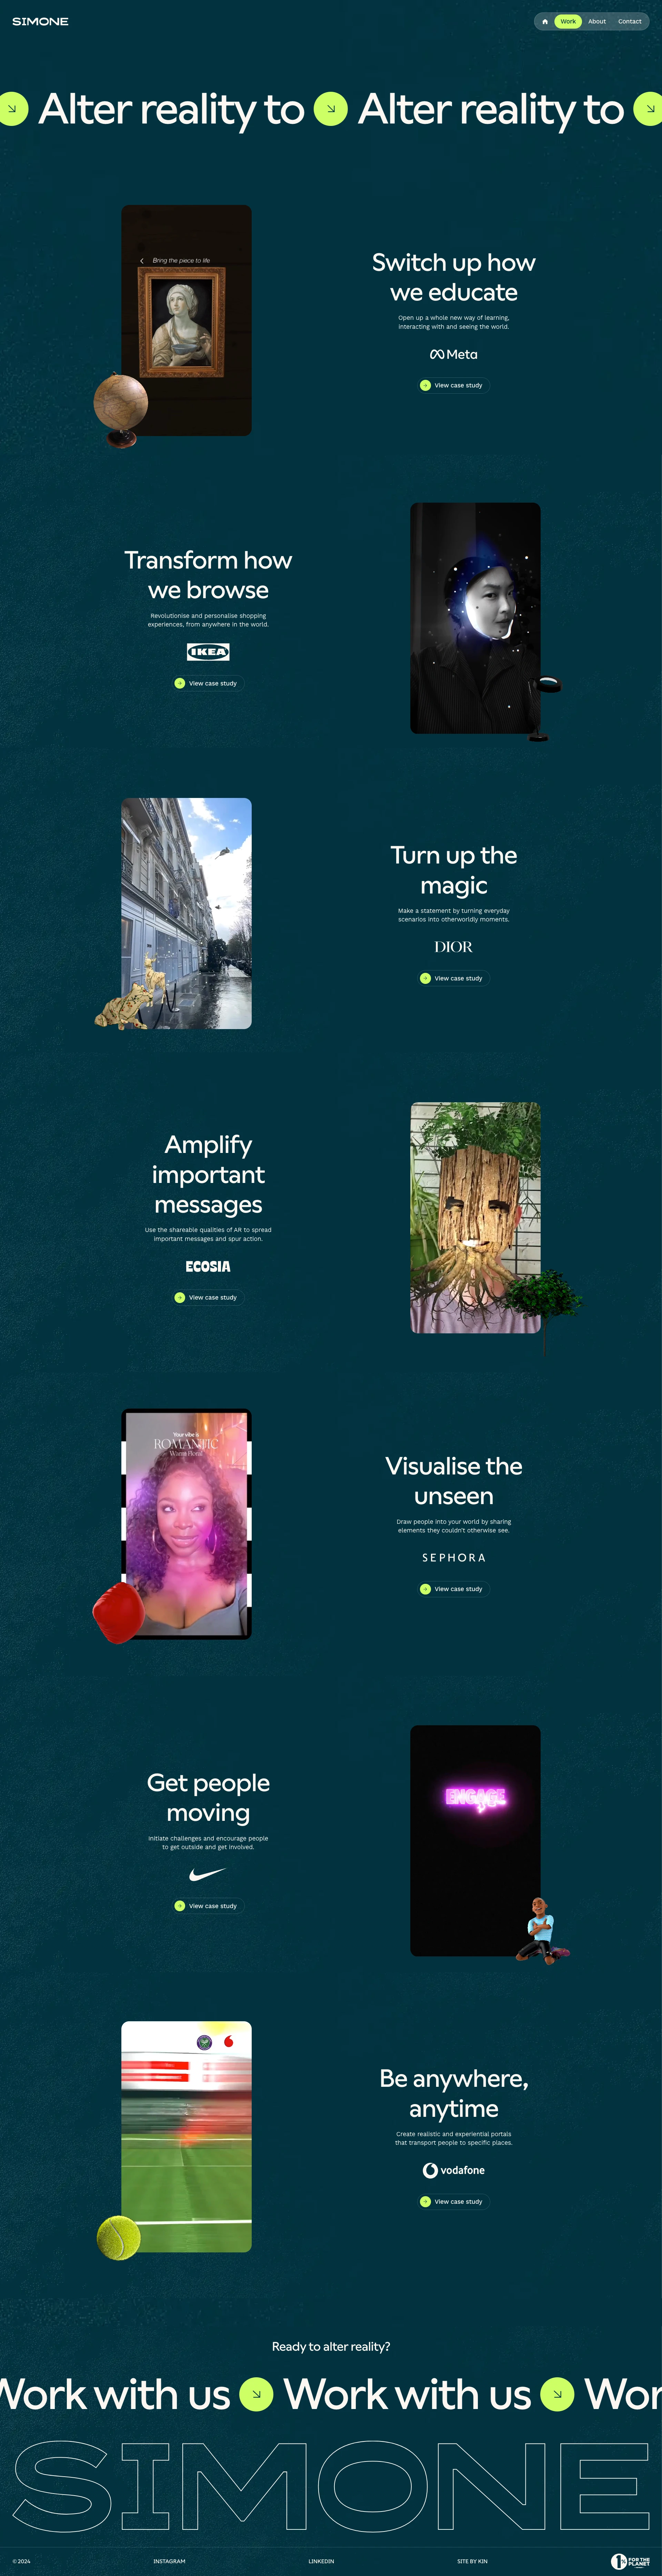 Simone Landing Page Example: Simone is a creative studio that believes in the power of AR to prompt action, inspire change and turn up the magic.